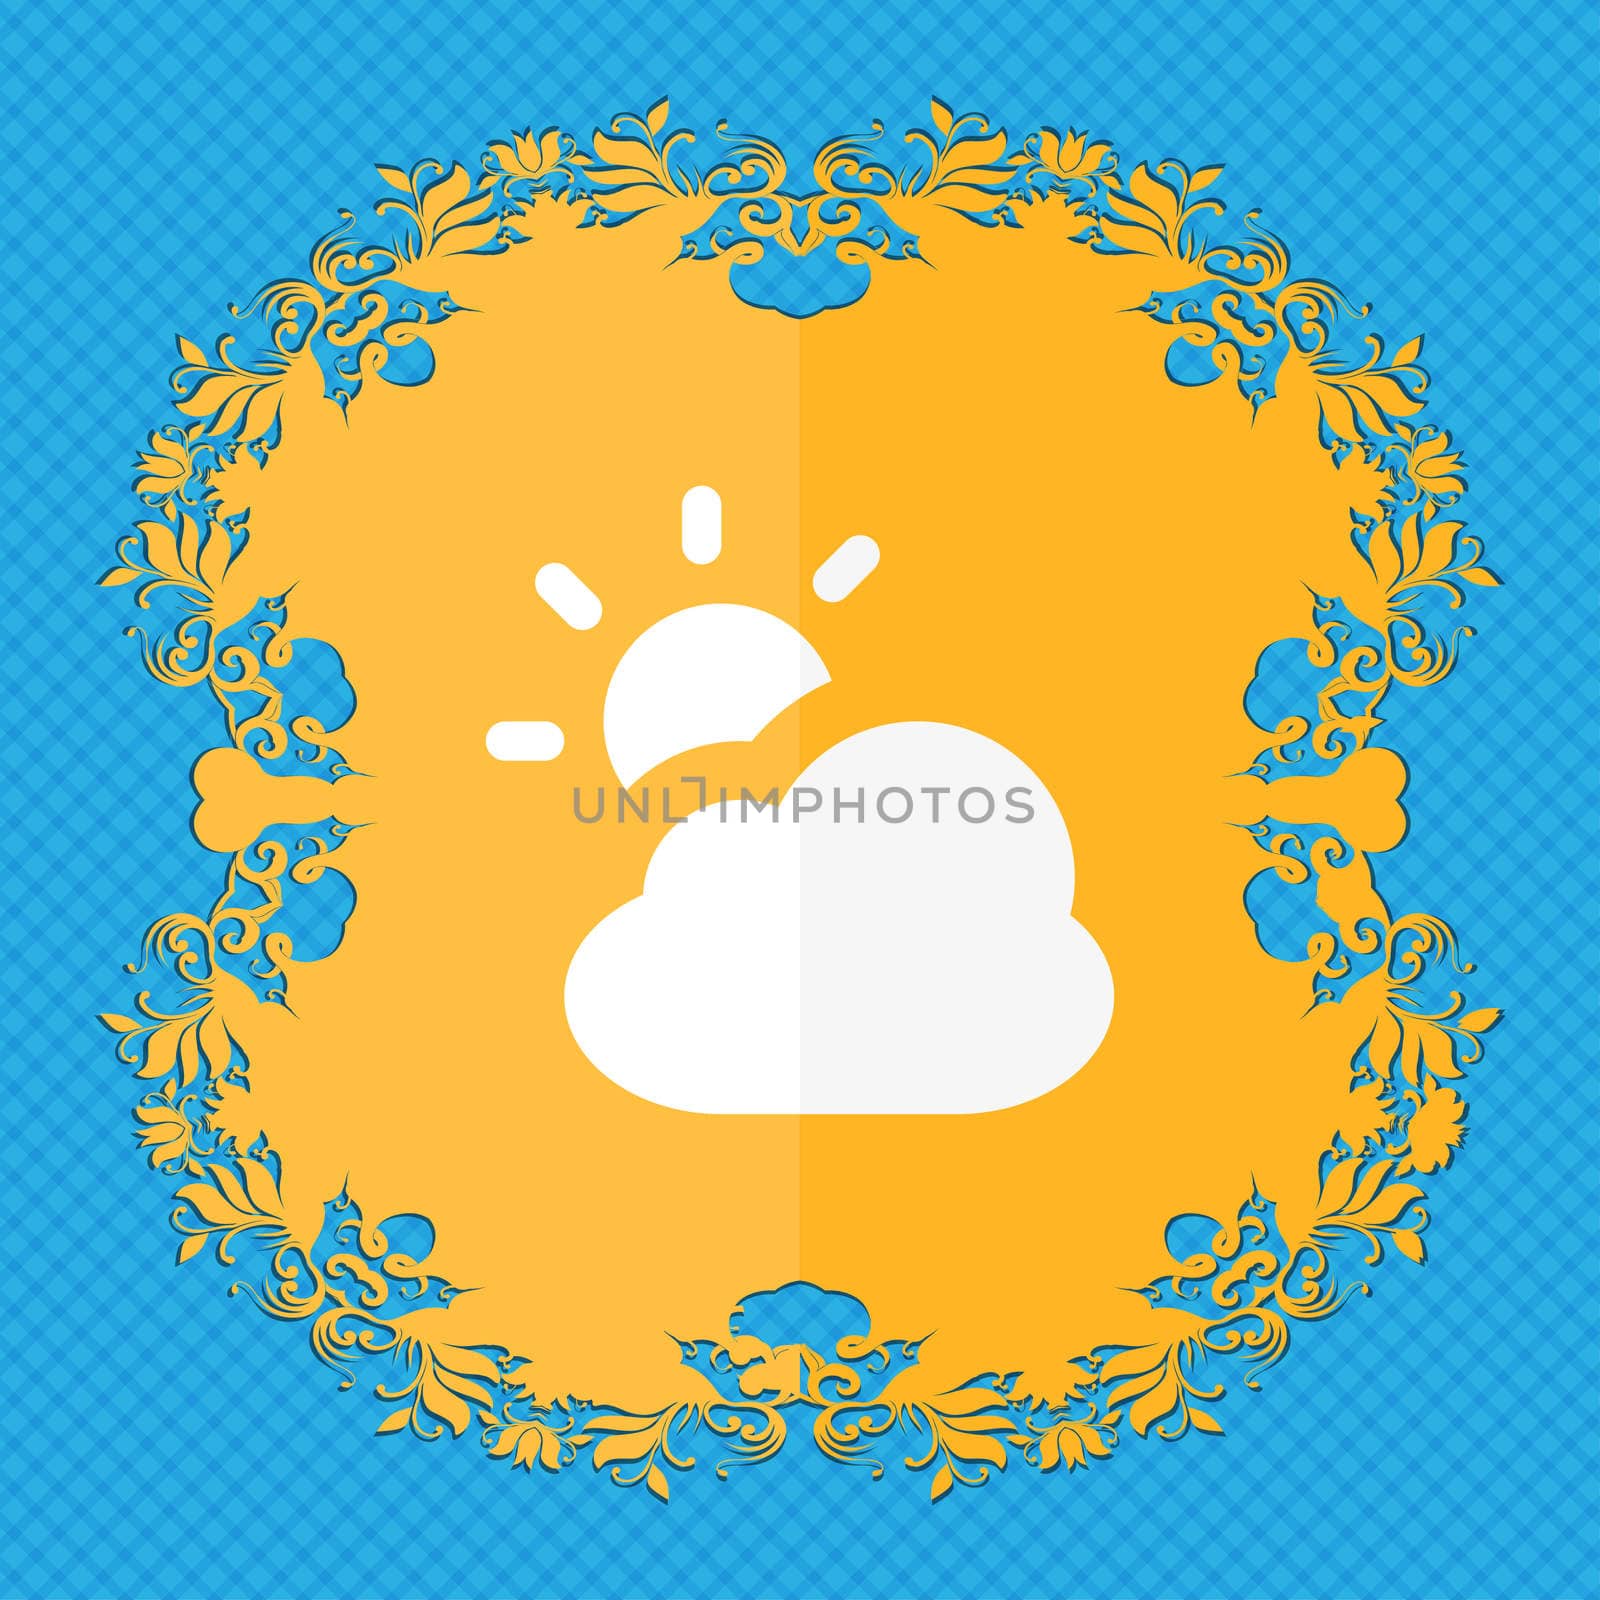 weather . Floral flat design on a blue abstract background with place for your text. illustration